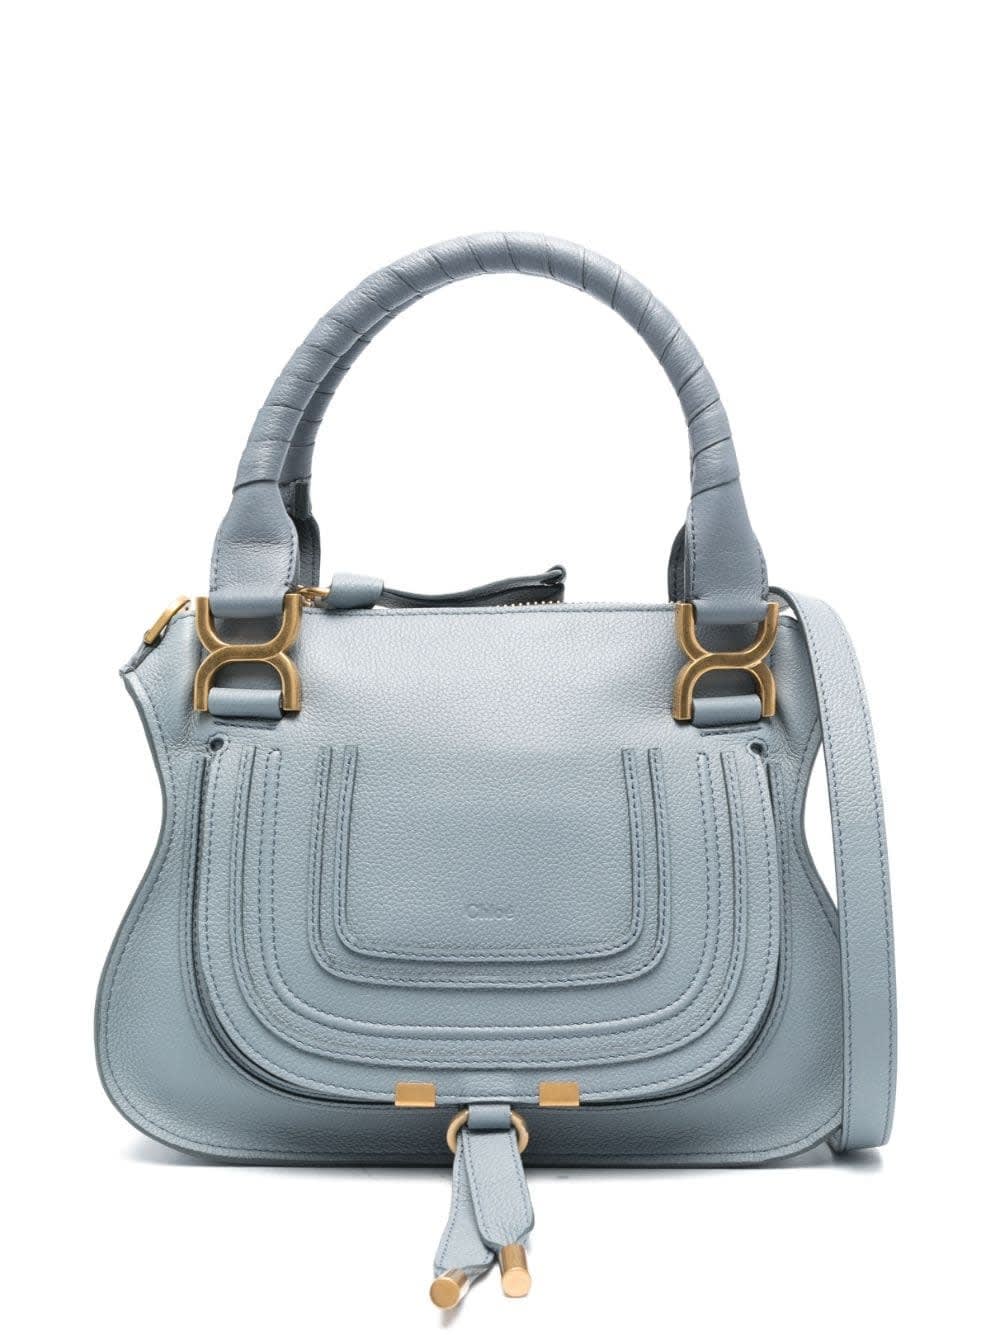 CHLOÉ MARCIE SMALL BAG IN STORM BLUE GRAINED LEATHER